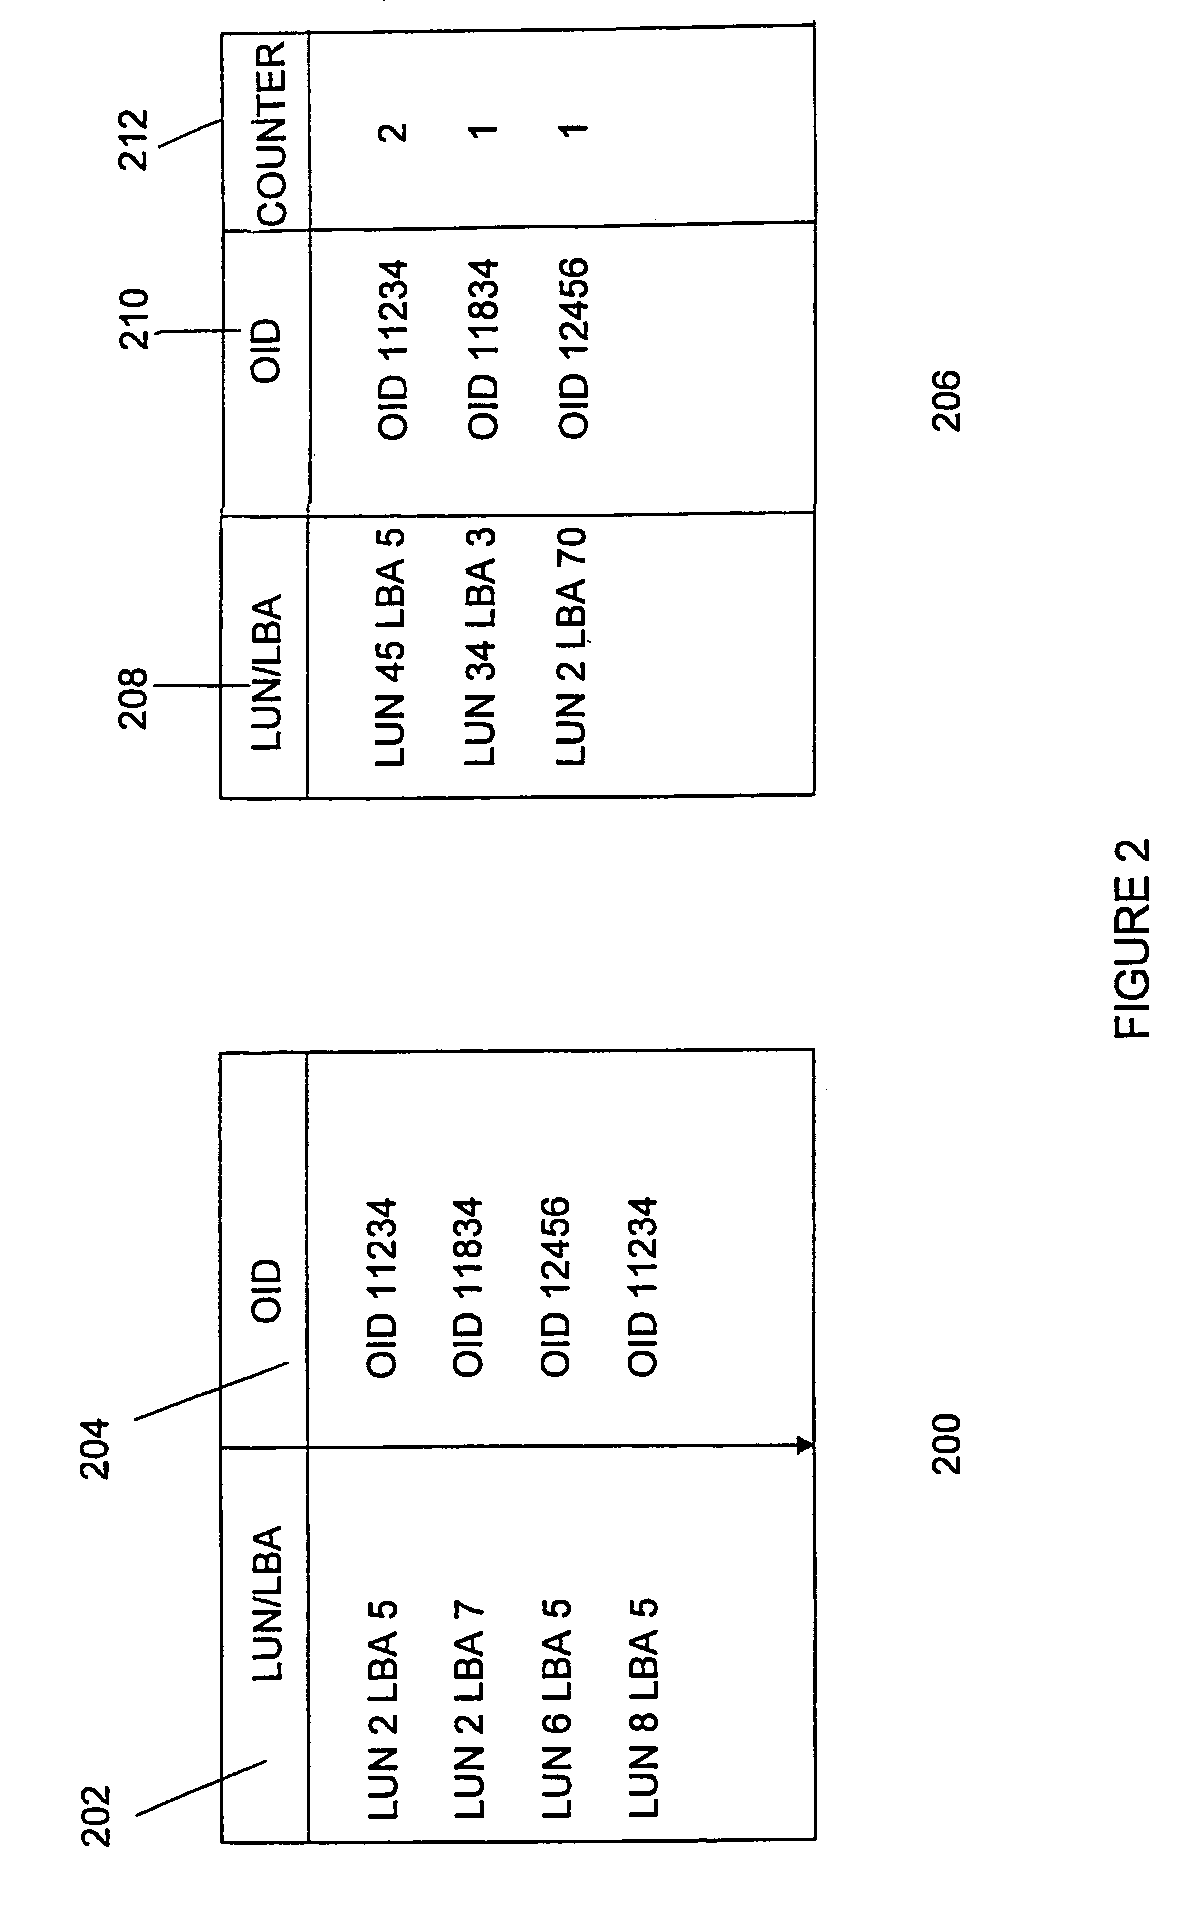 Flexible LUN/LBA interface for content addressable reference storage